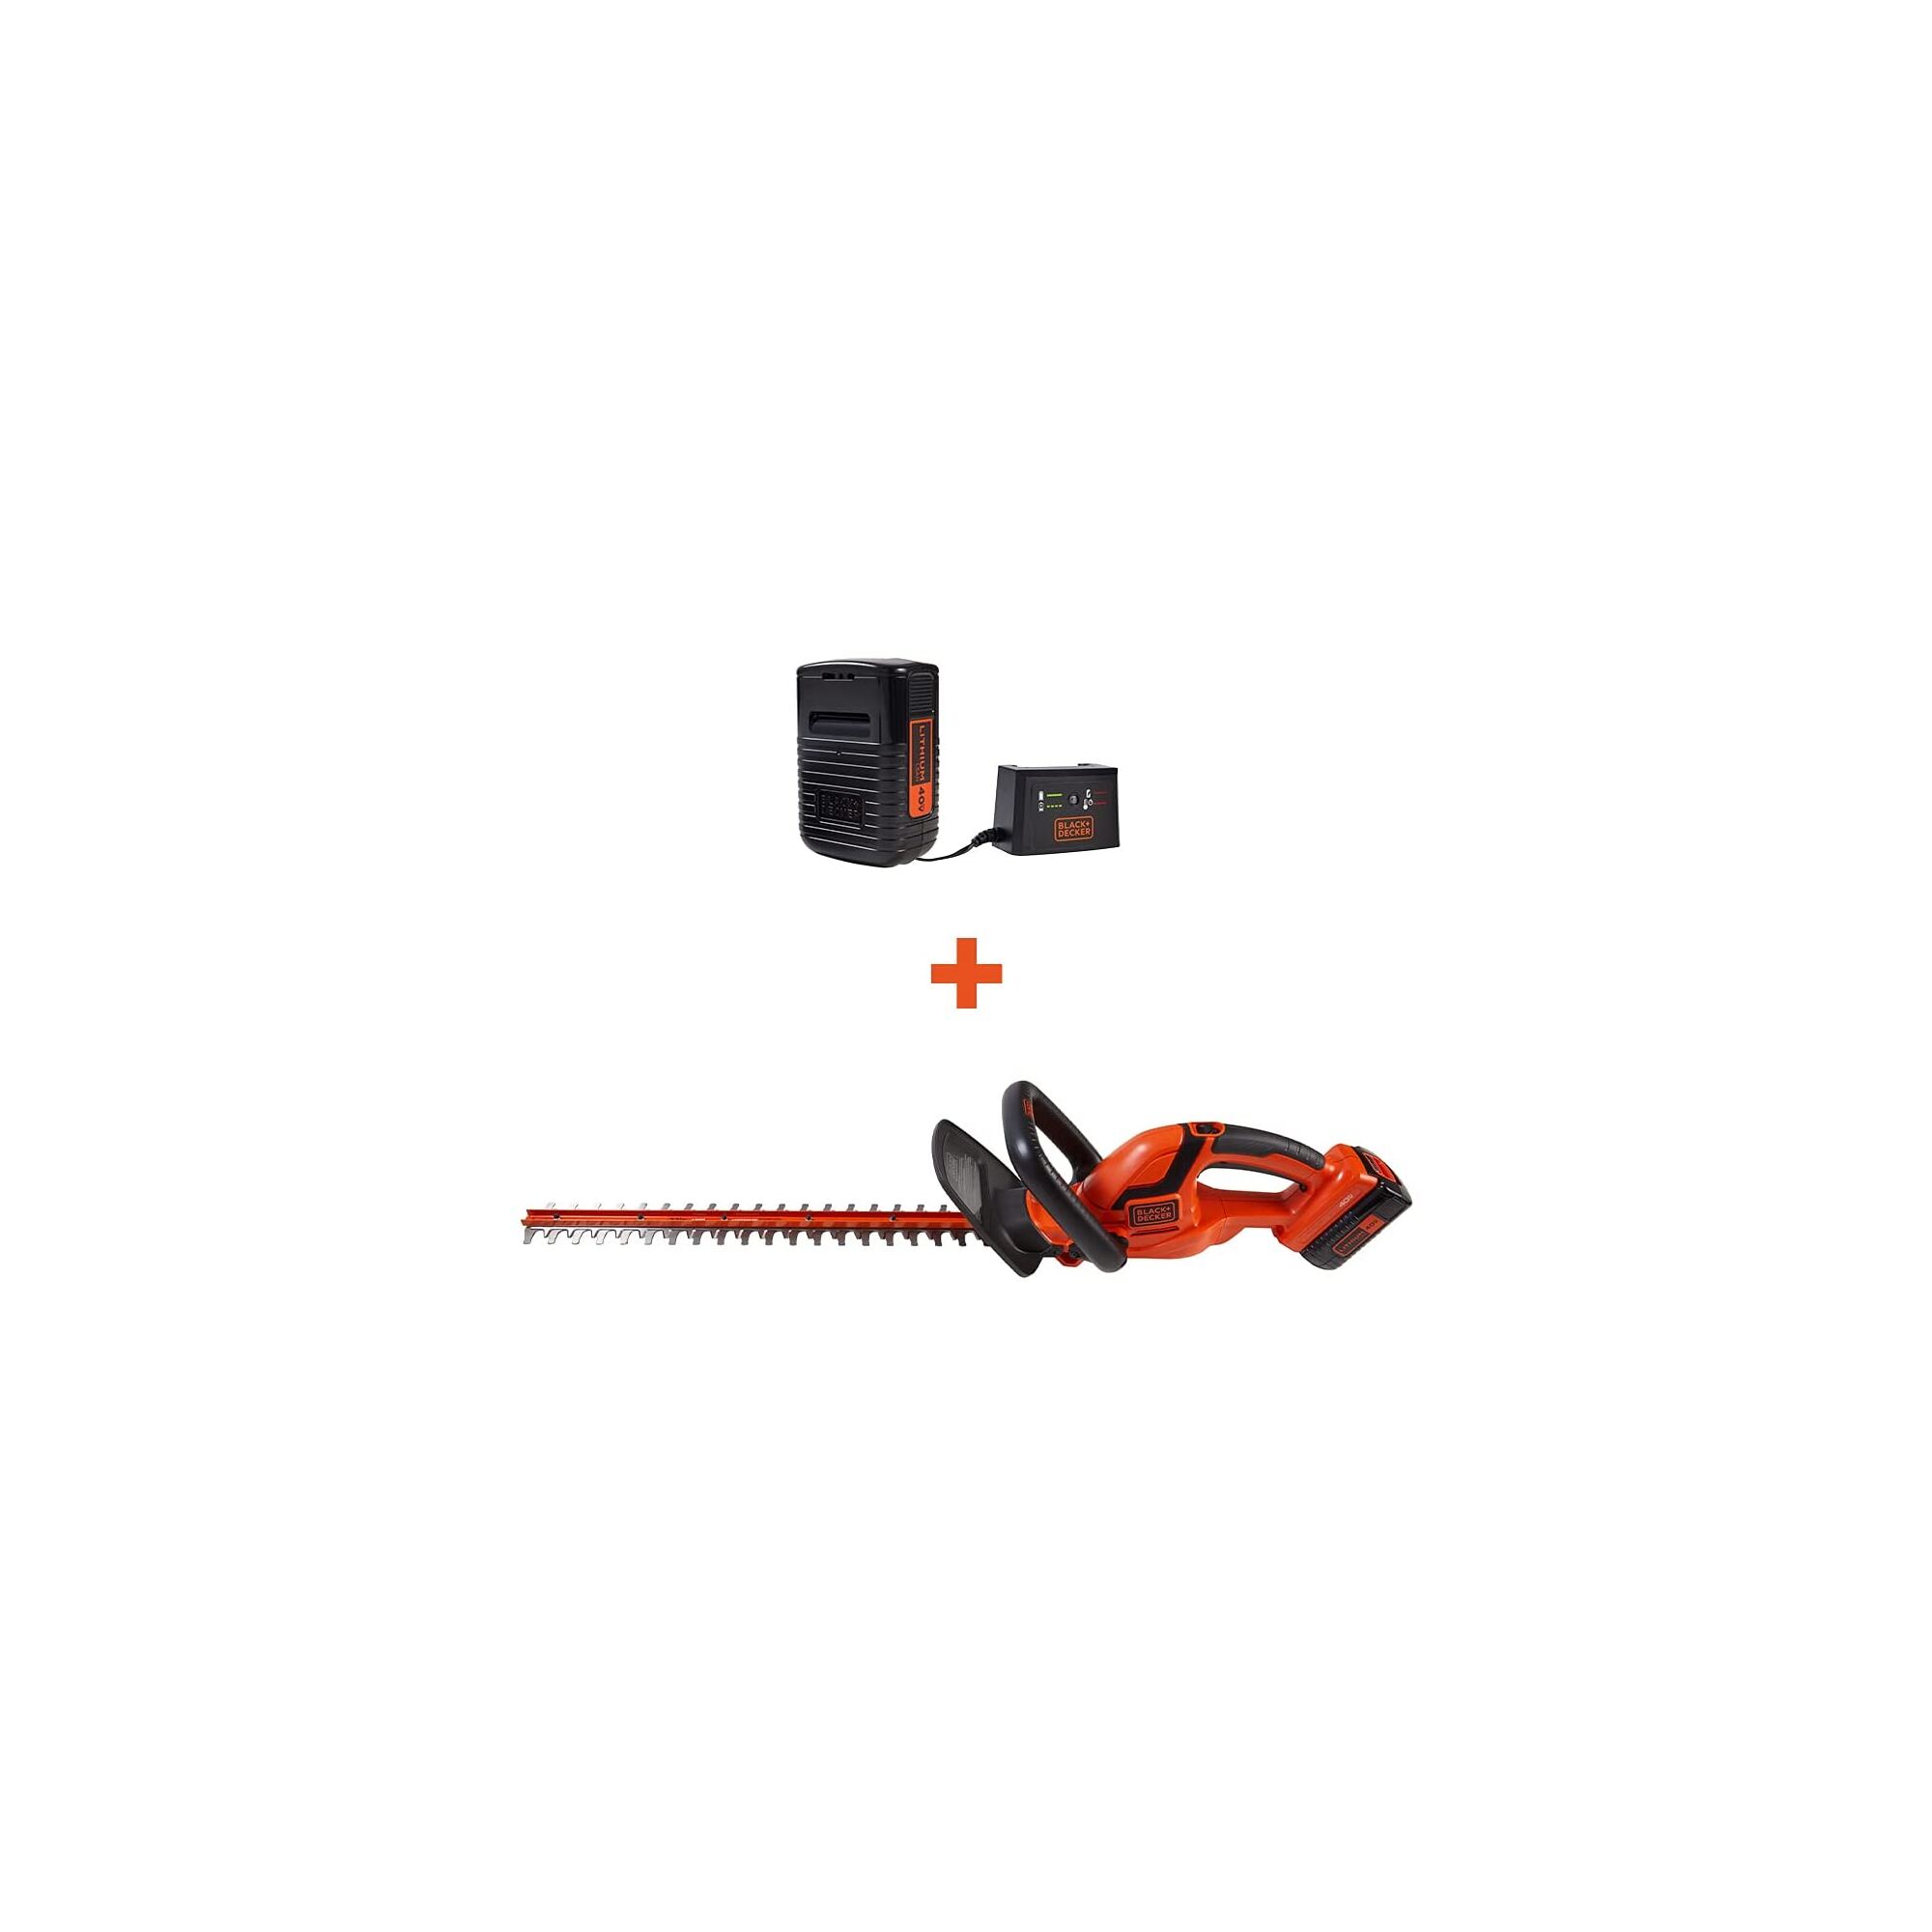 22 Inch 40 Volt Max Hedge Trimmer and charger on white background.